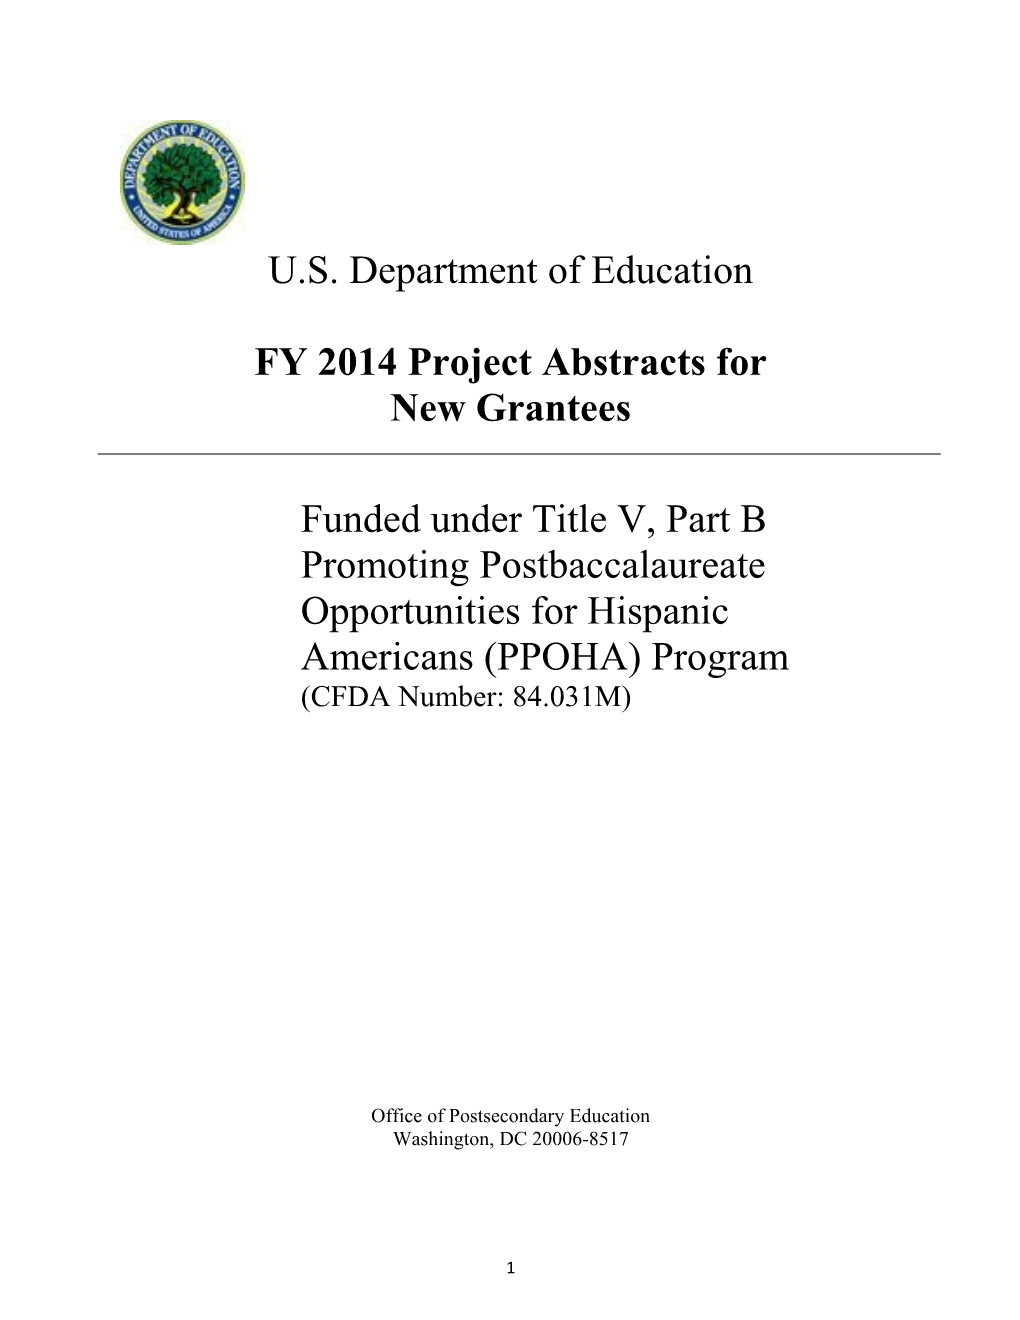 FY 2014 Project Abstracts Under the Promoting Postbaccalaureate Opportunities for Hispanic